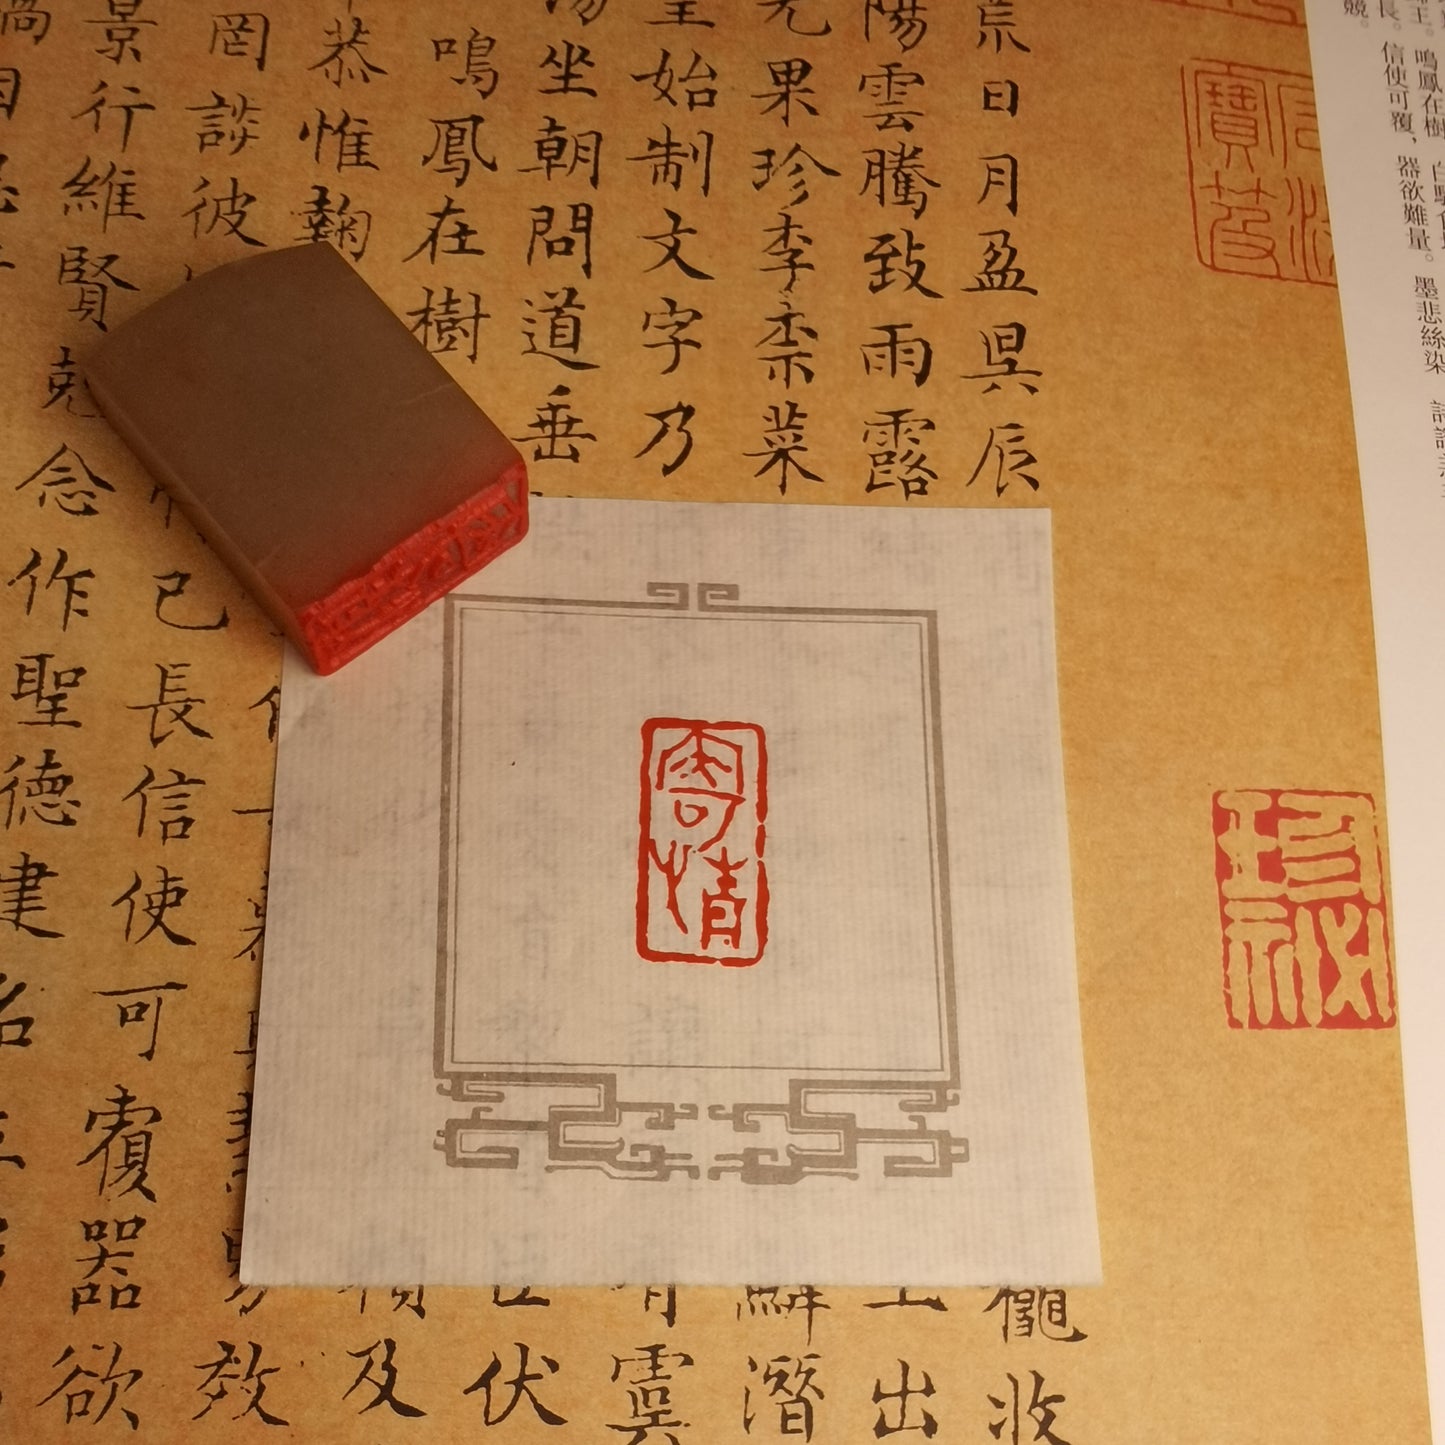 Chinese Stamps/seal- Free chapter Seal.